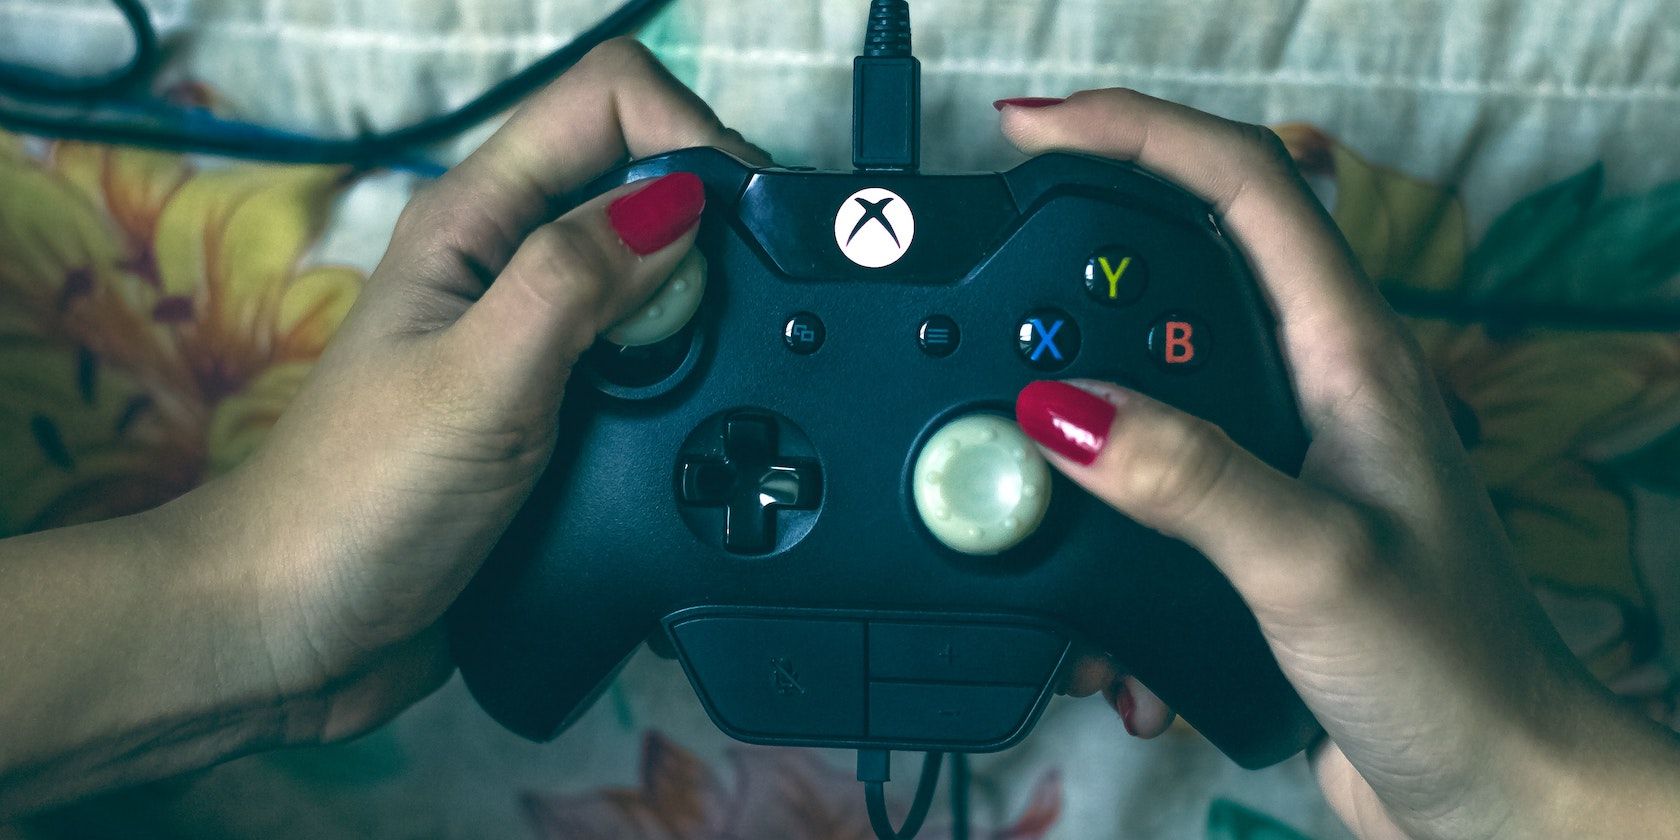 An Xbox One controller is held by two hands with painted nails.